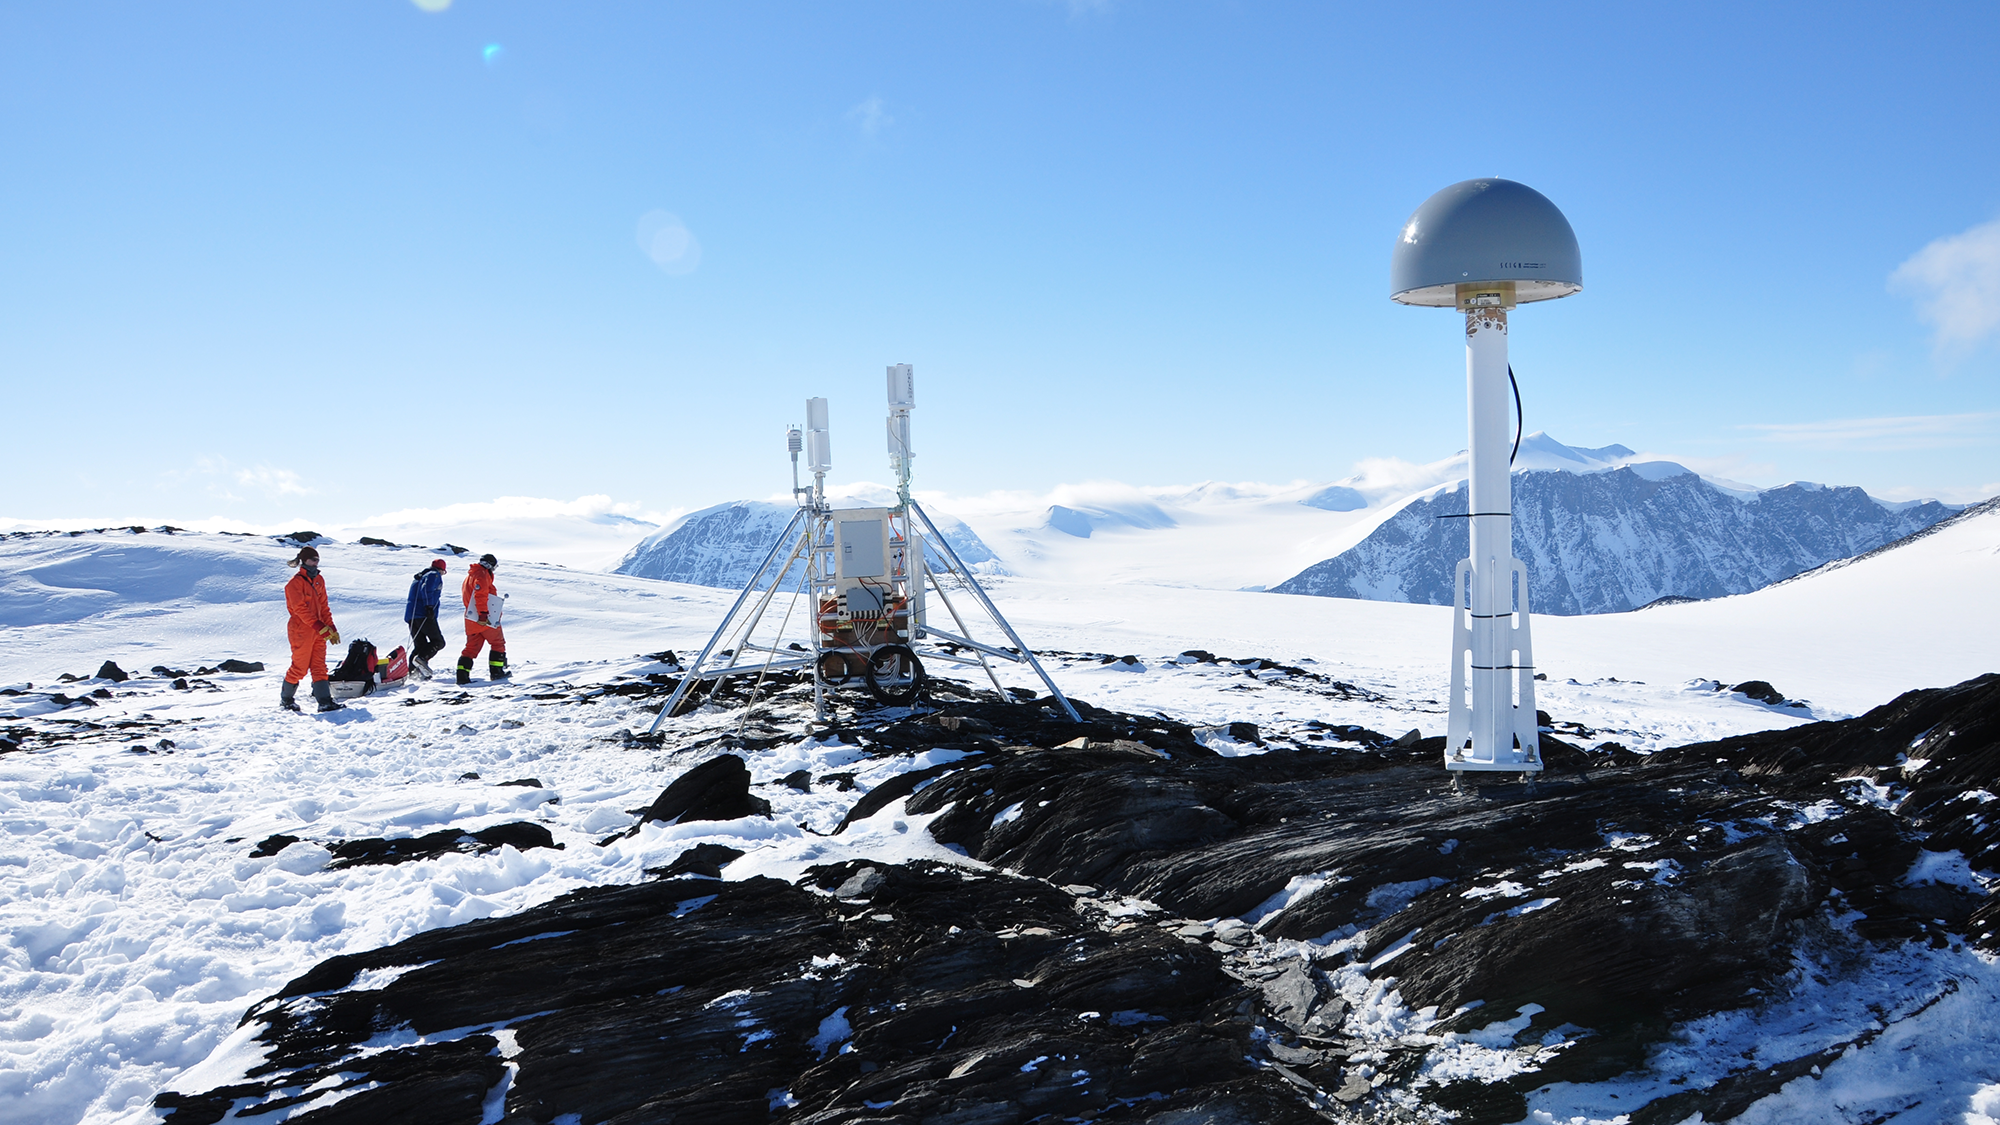 The GNSS monuments connect the GPS antenna to the bedrock and allow millimetre-level motions of the bedrock to be tracked over years as it shifts in response to past and present glacier melt. The GNSS is powered entirely by renewable energy 